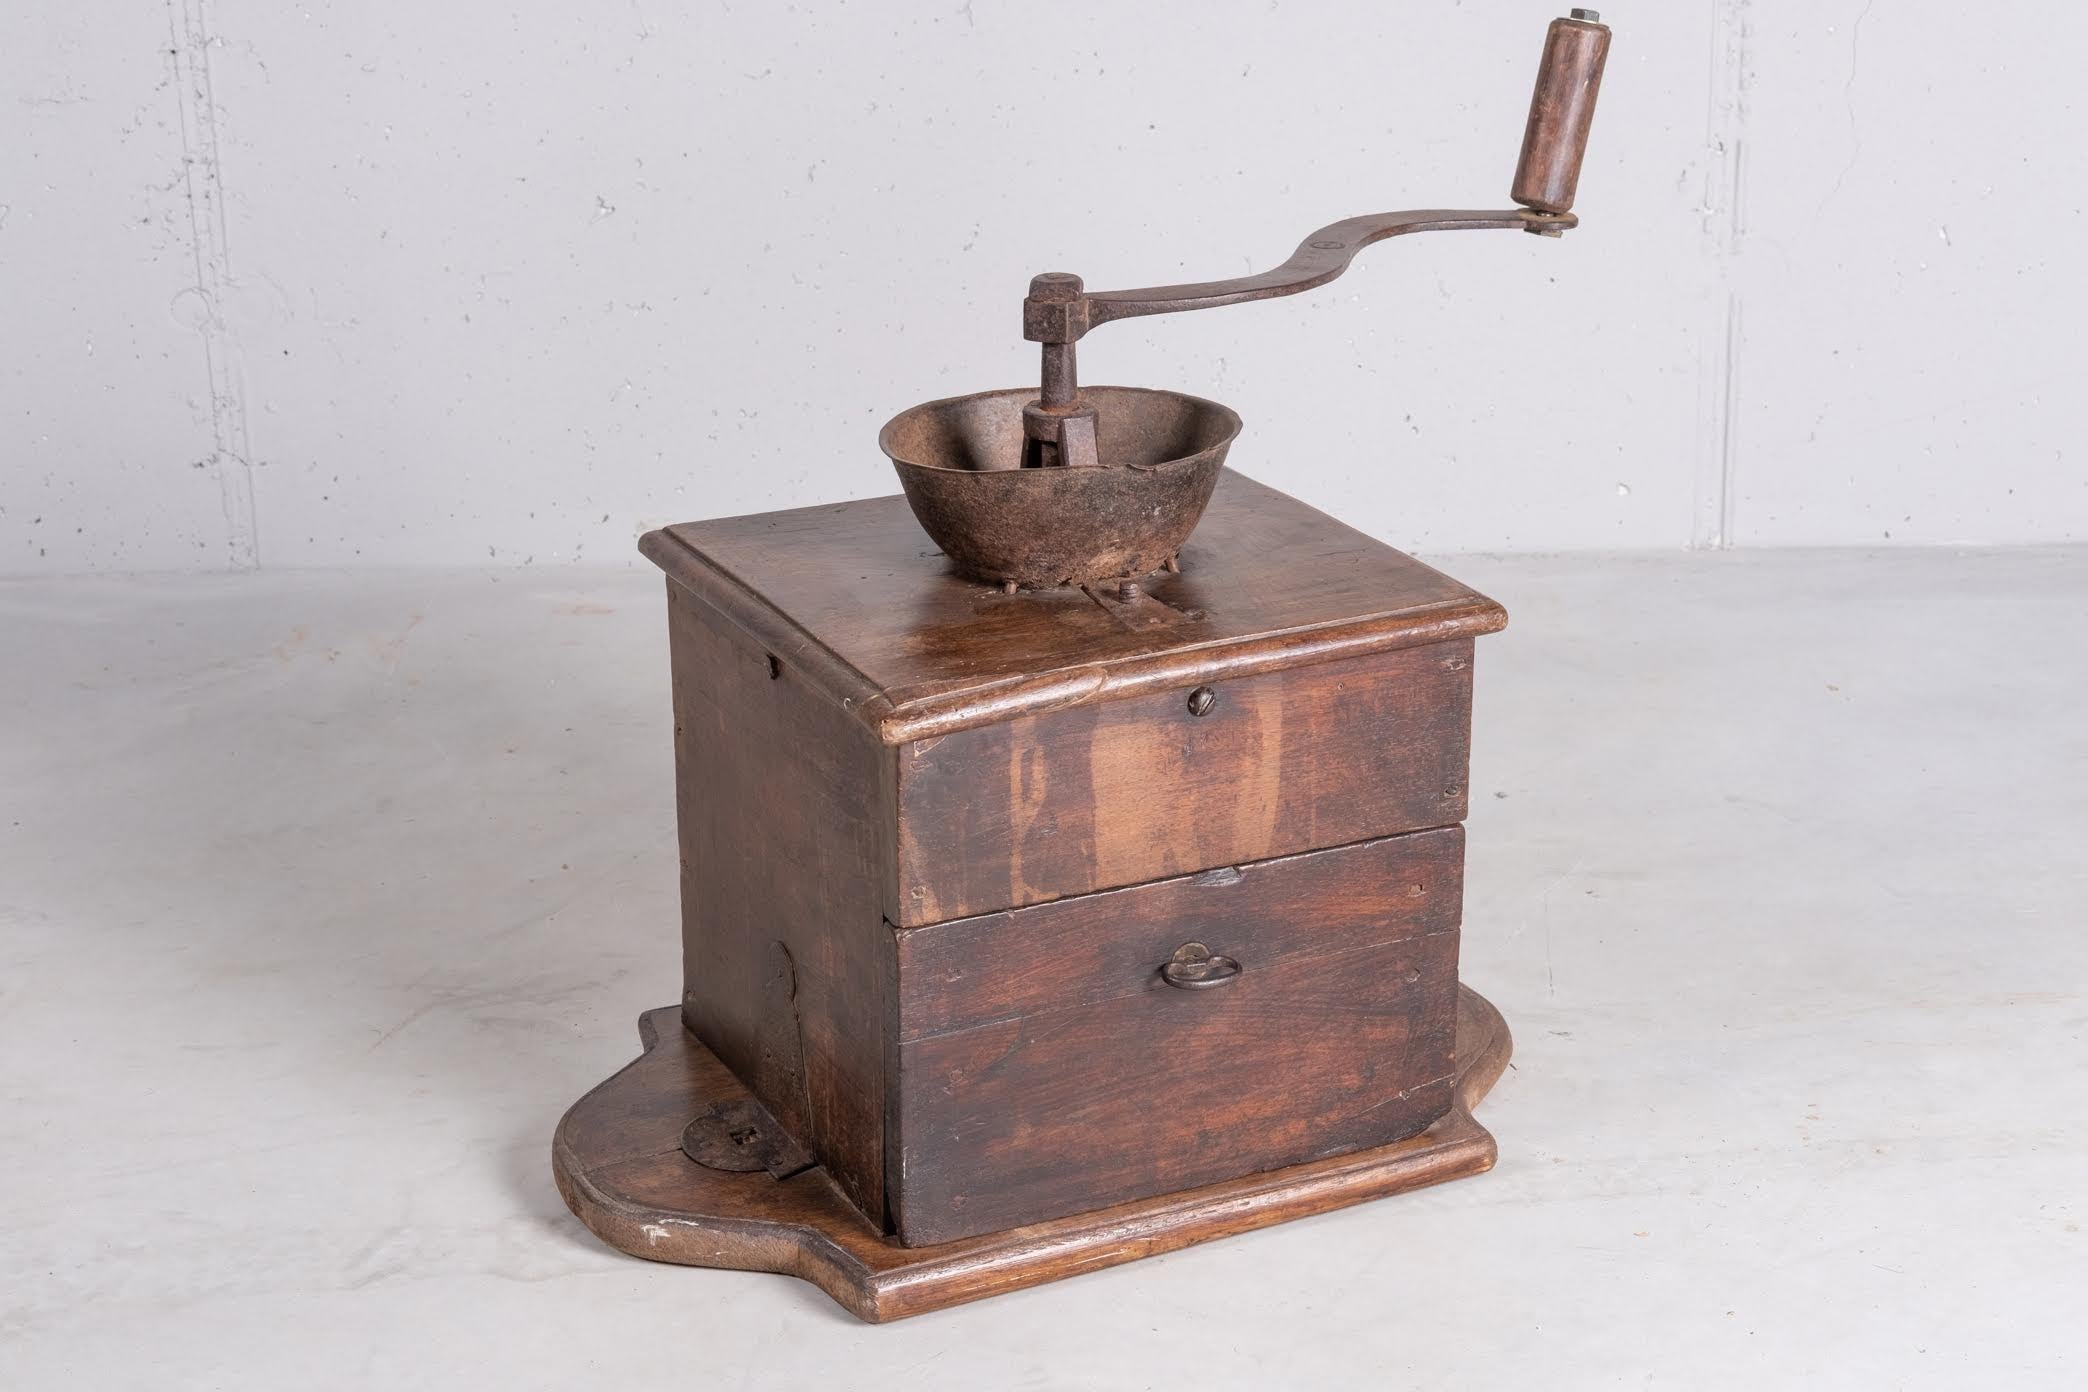 Big walnut coffee grinder, features an amazing patina and all the original metal parts.